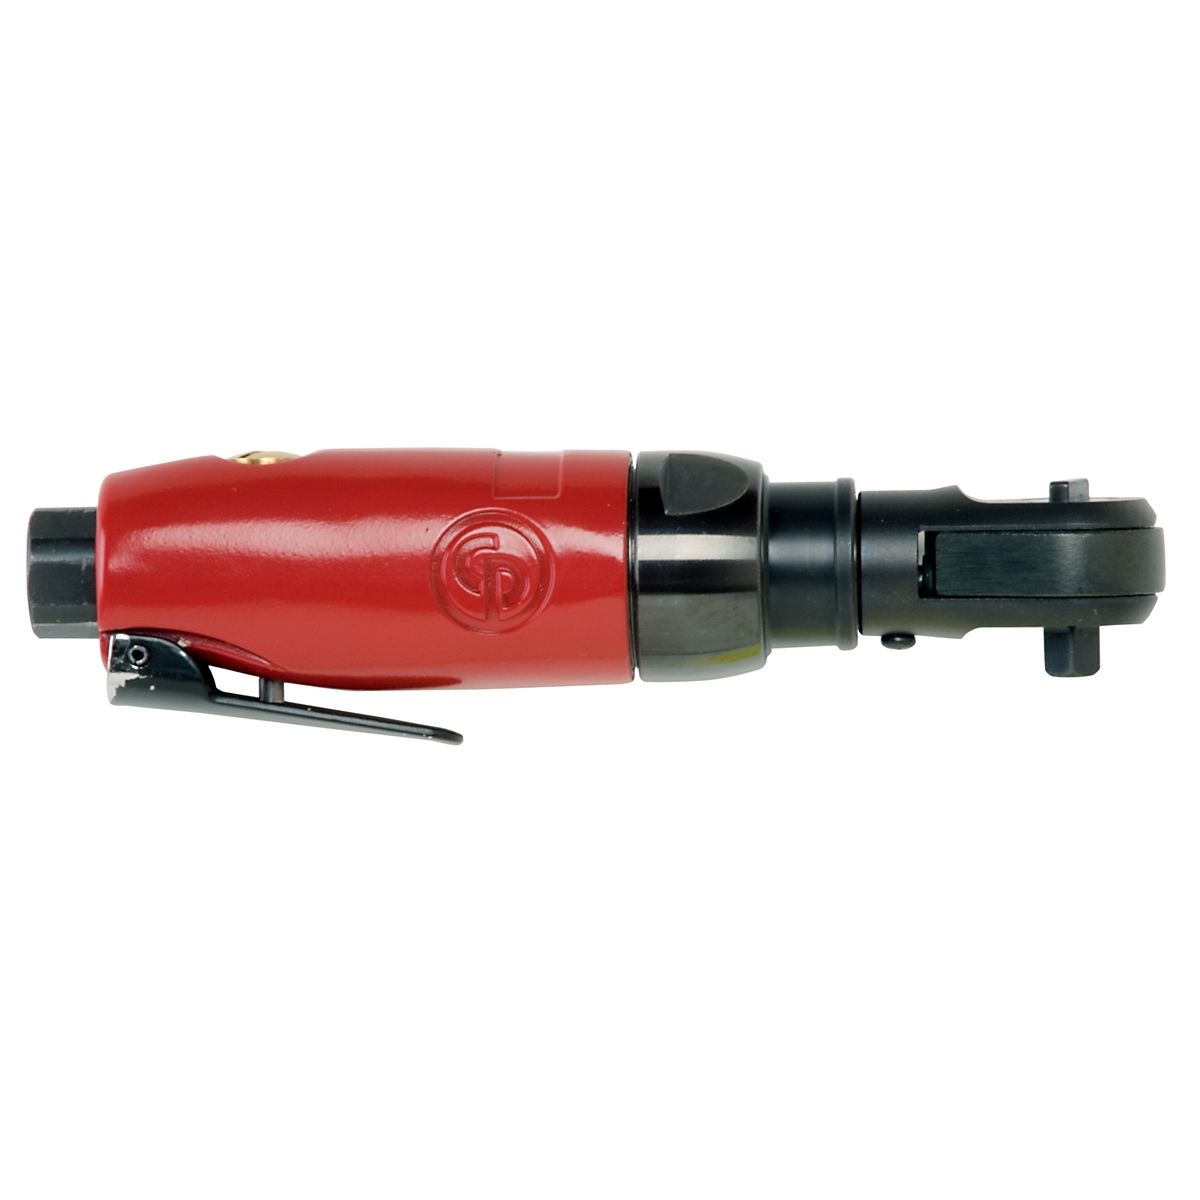 Compact 1/4 In Dr Ratchet - 4 Position Swivel Head